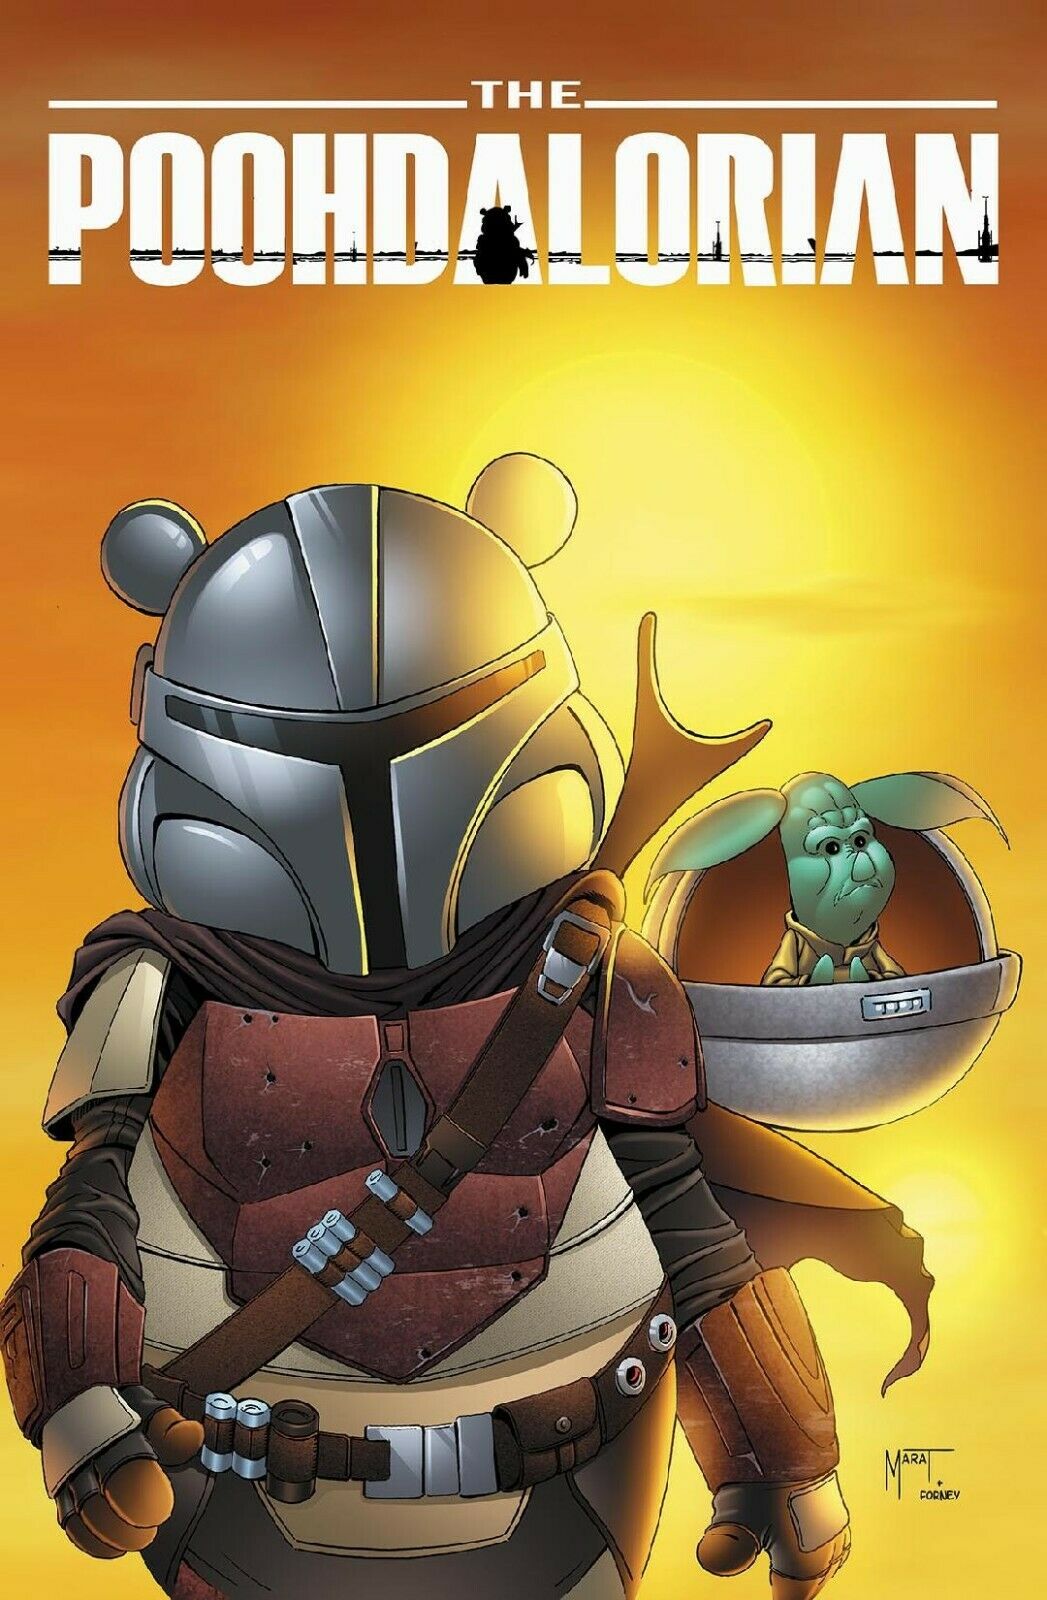 Do You Pooh The Mandalorian Star Wars Homage Variant Cover by Marat Mychaels